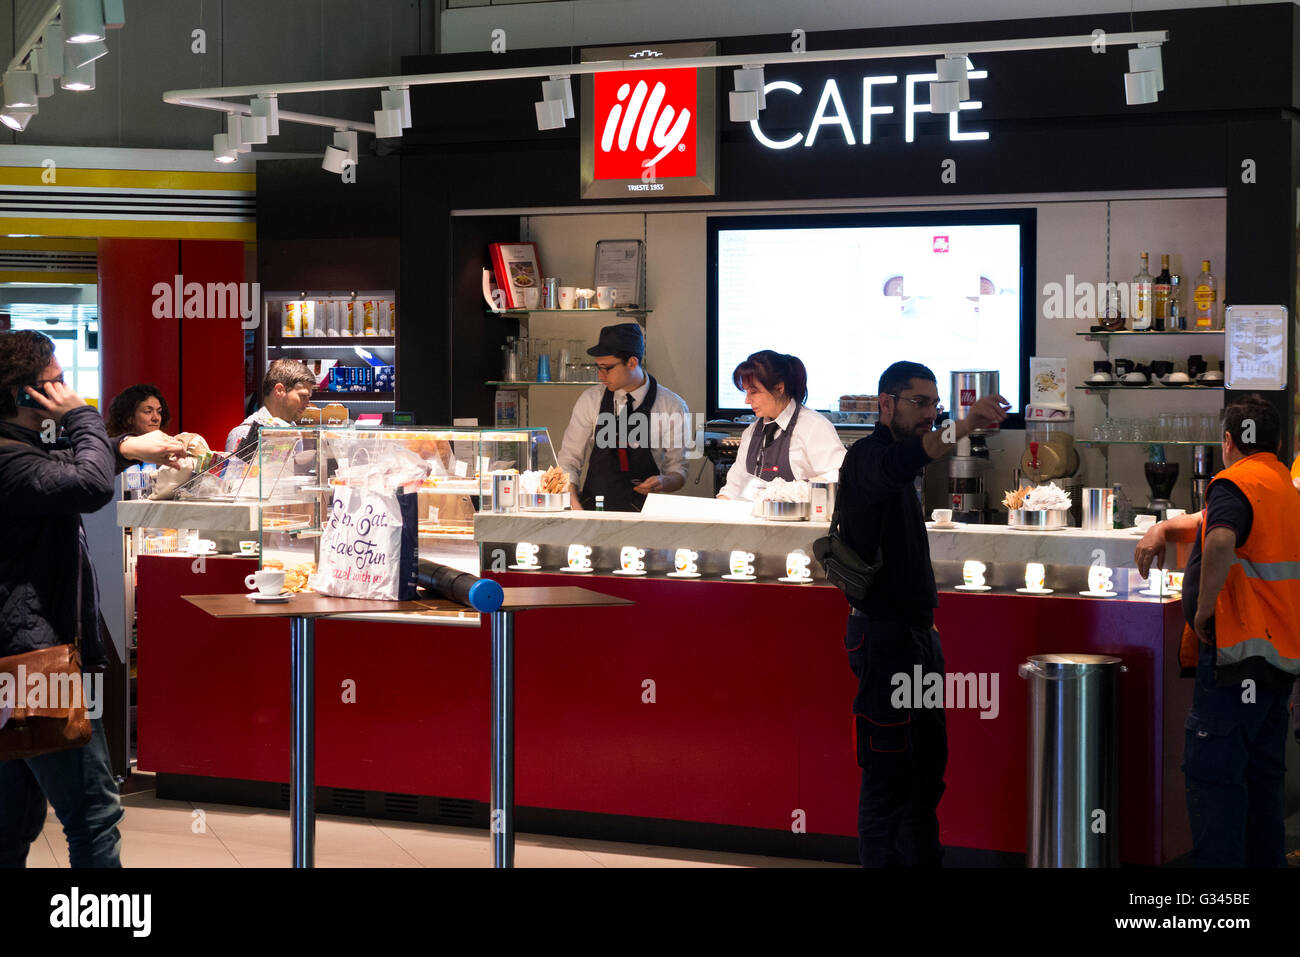 Illy brand Caffe / cafe coffee shop which serves / is serving drinks and snacks to passengers at Milan airport, Italy. Stock Photo